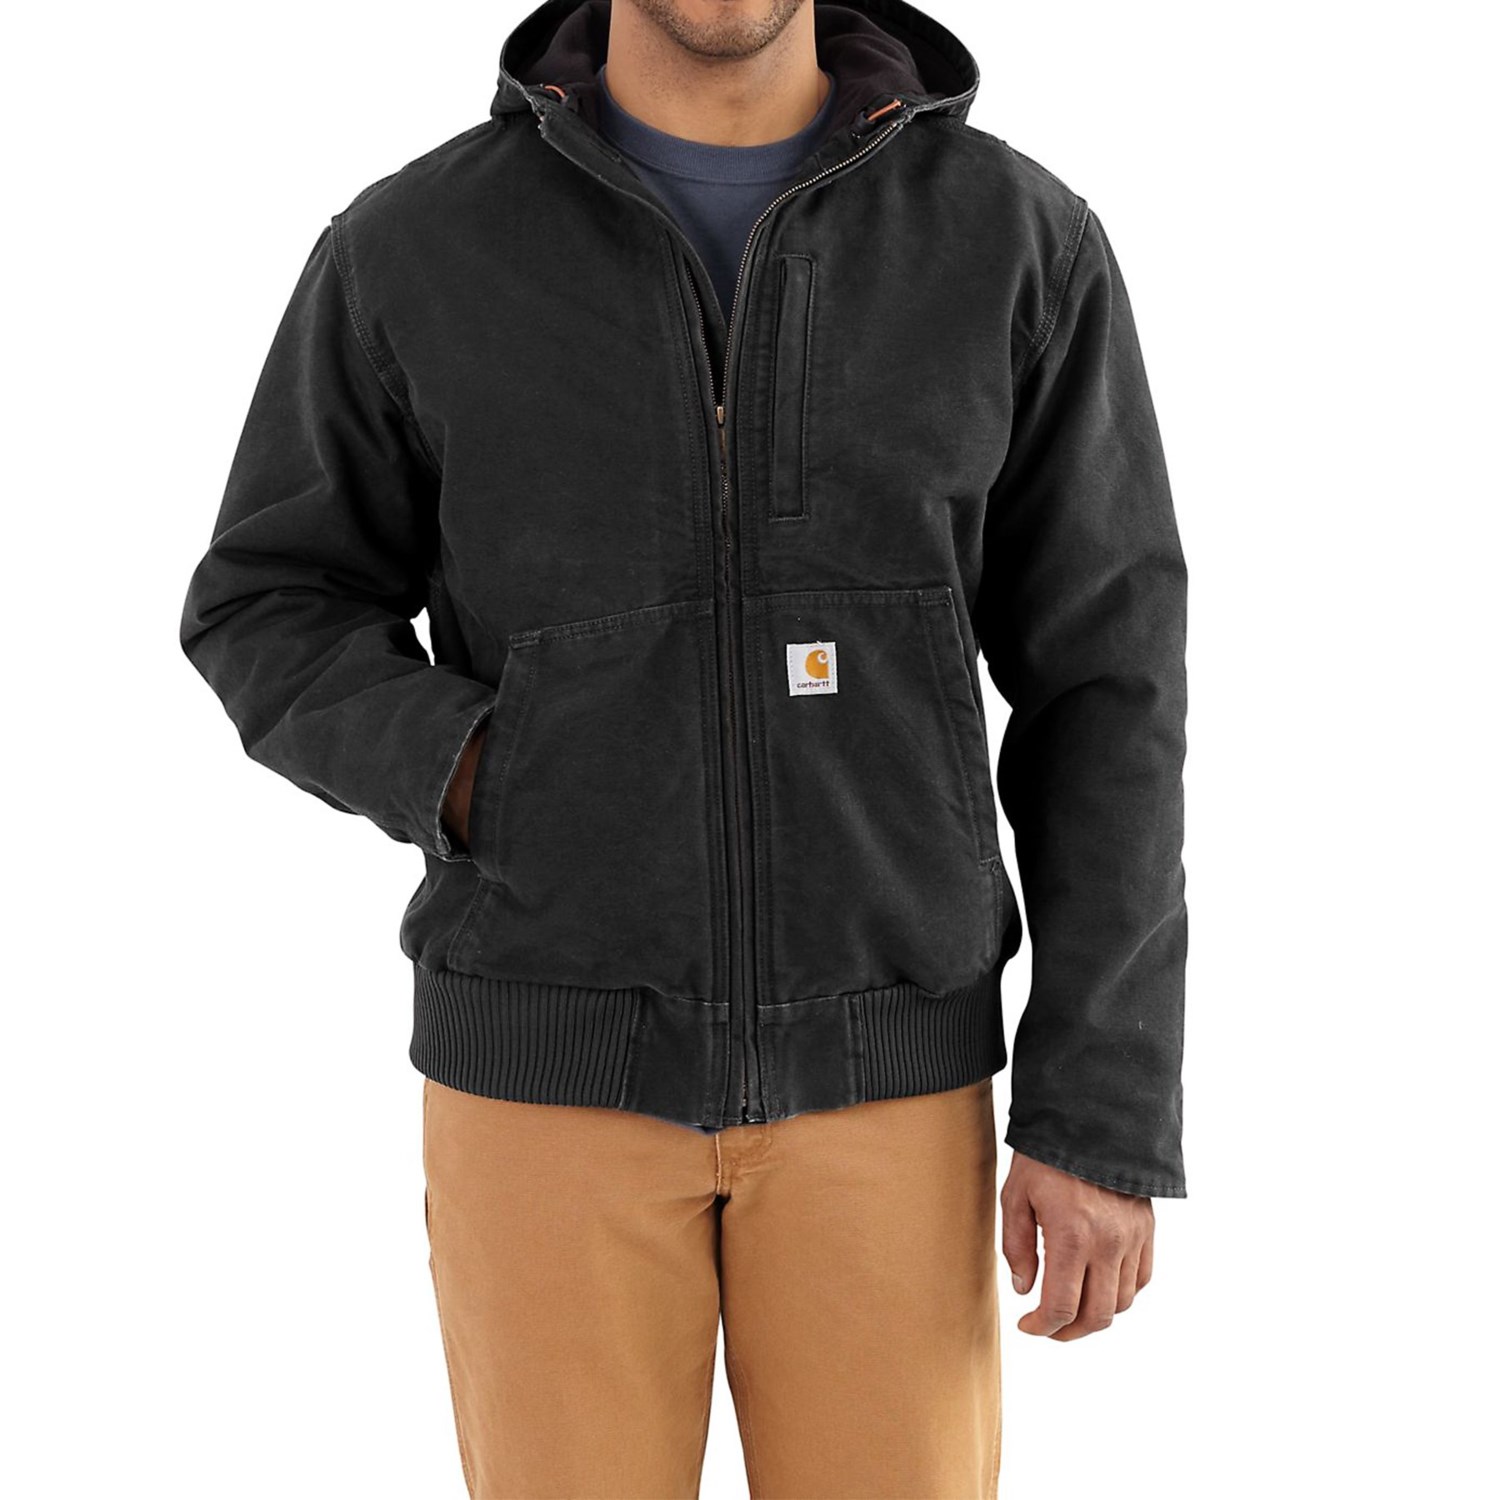 Carhartt Full Swing Armstrong Active Jacket â Factory Seconds (For Men)